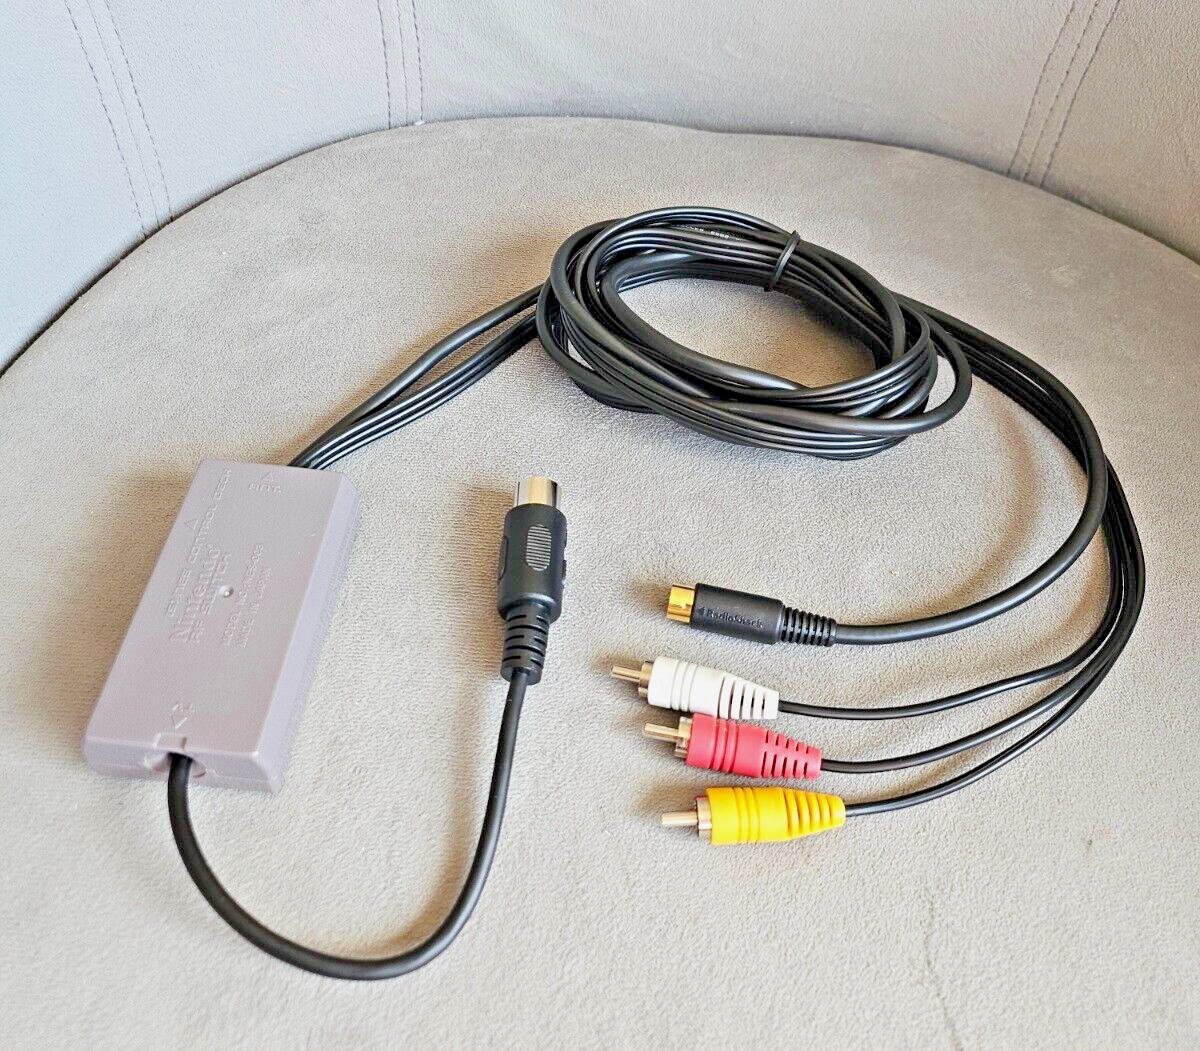 Atari 800 130XE 65XE Color S-Video, Composite Video and 2 Channel Audio Cable